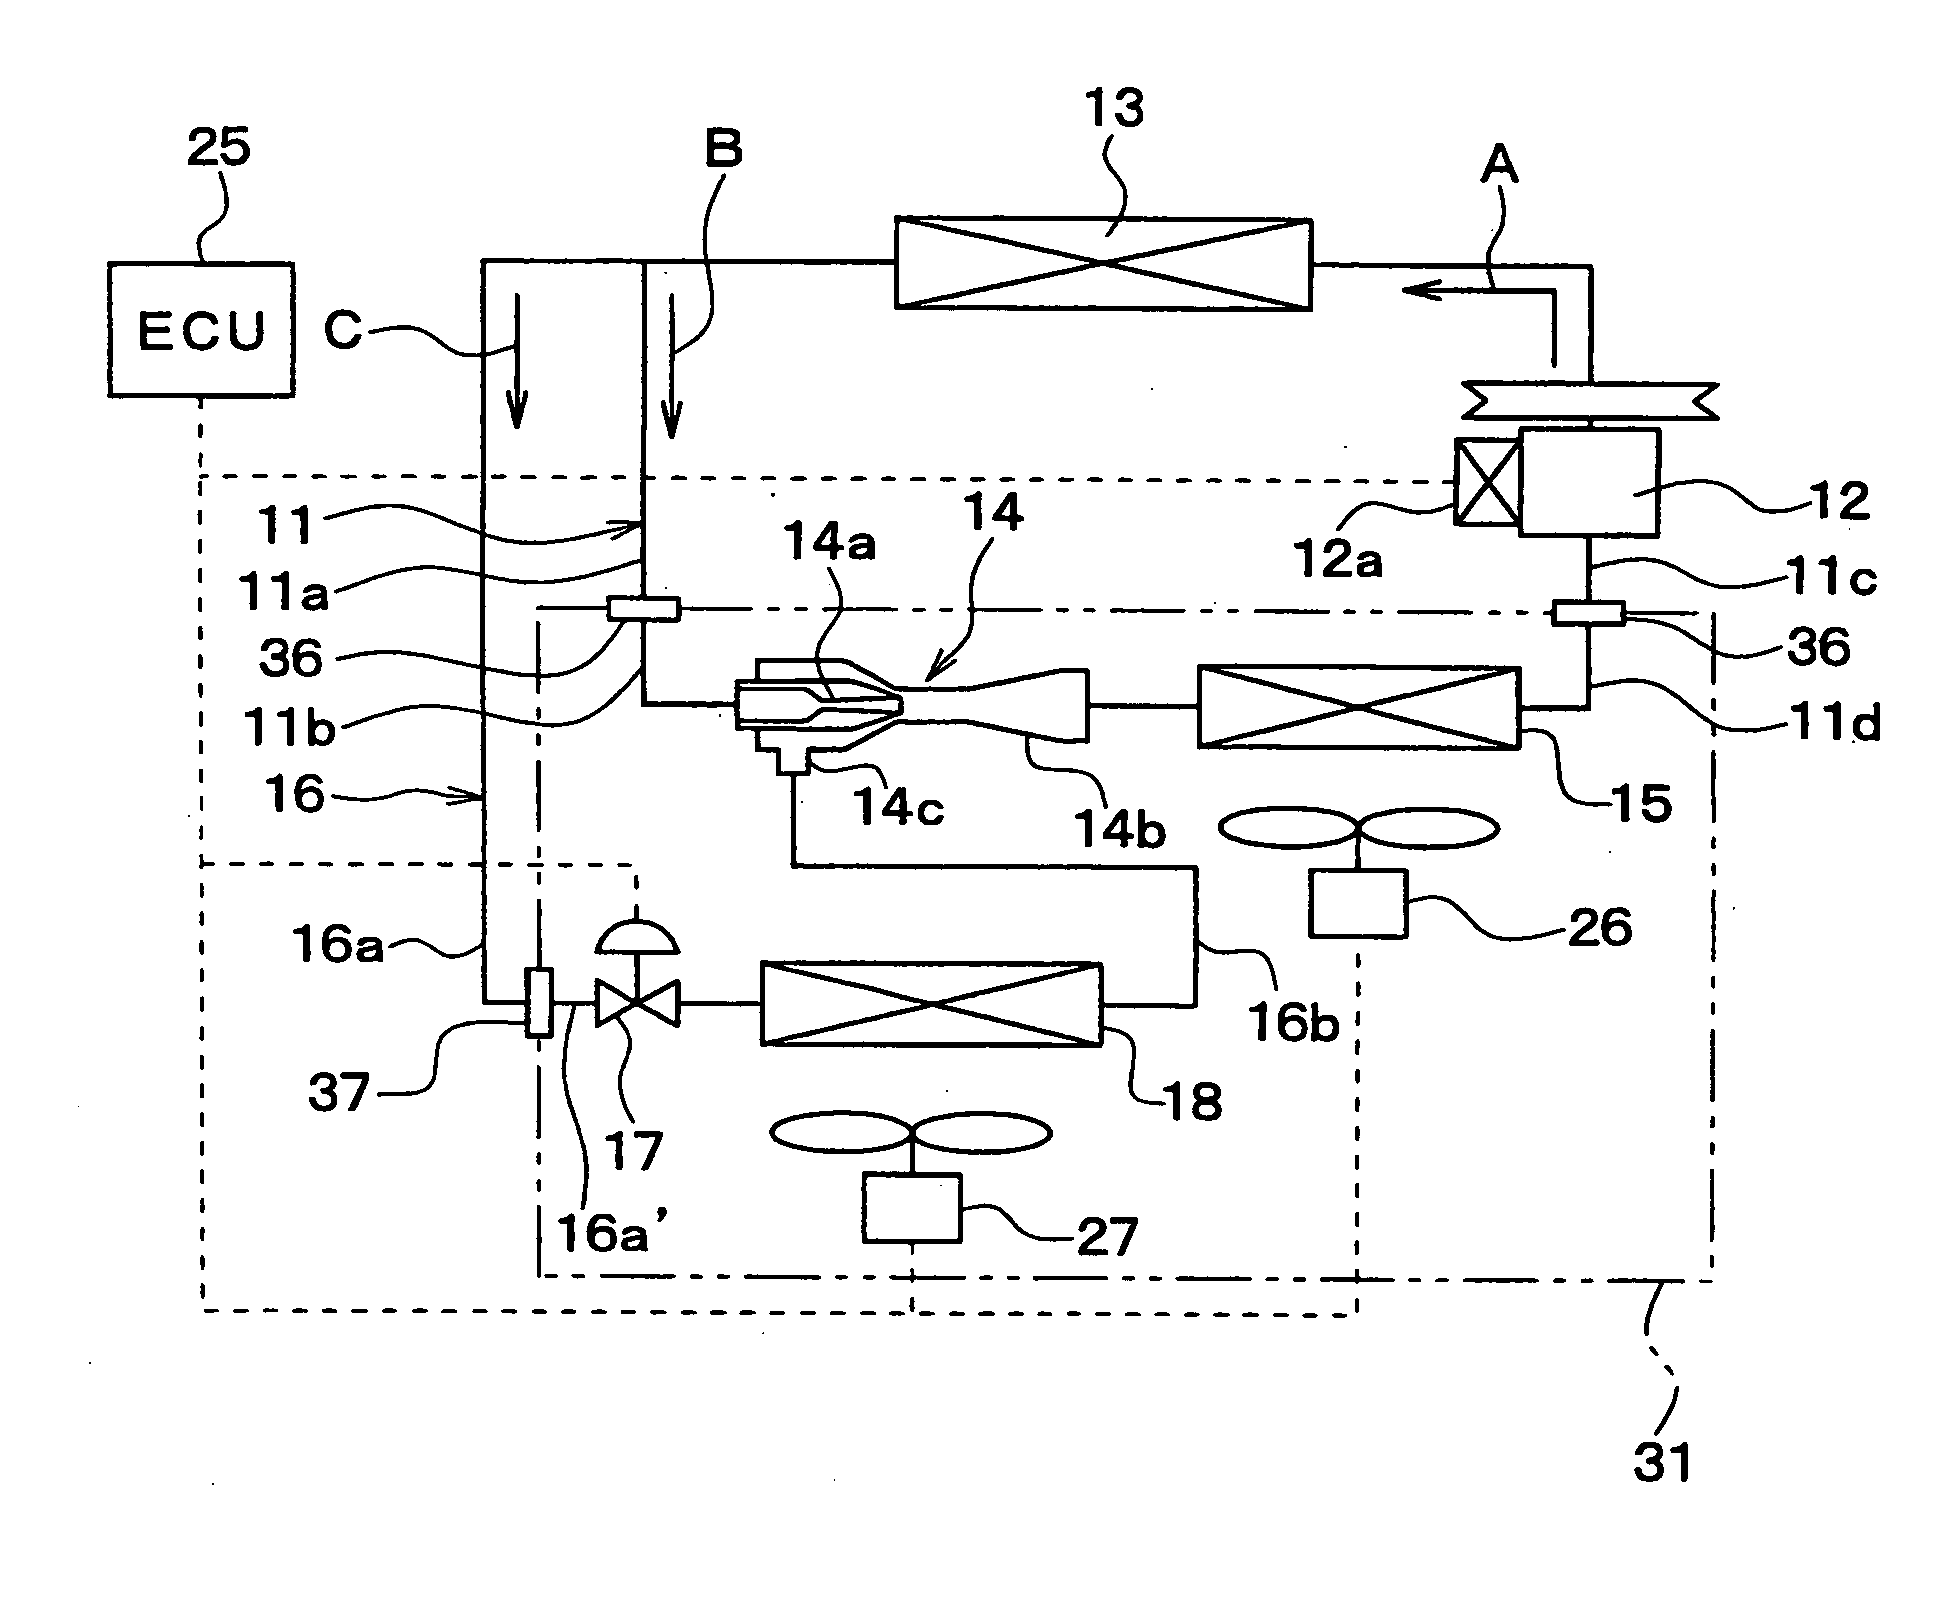 Refrigerant cycle device for vehicle